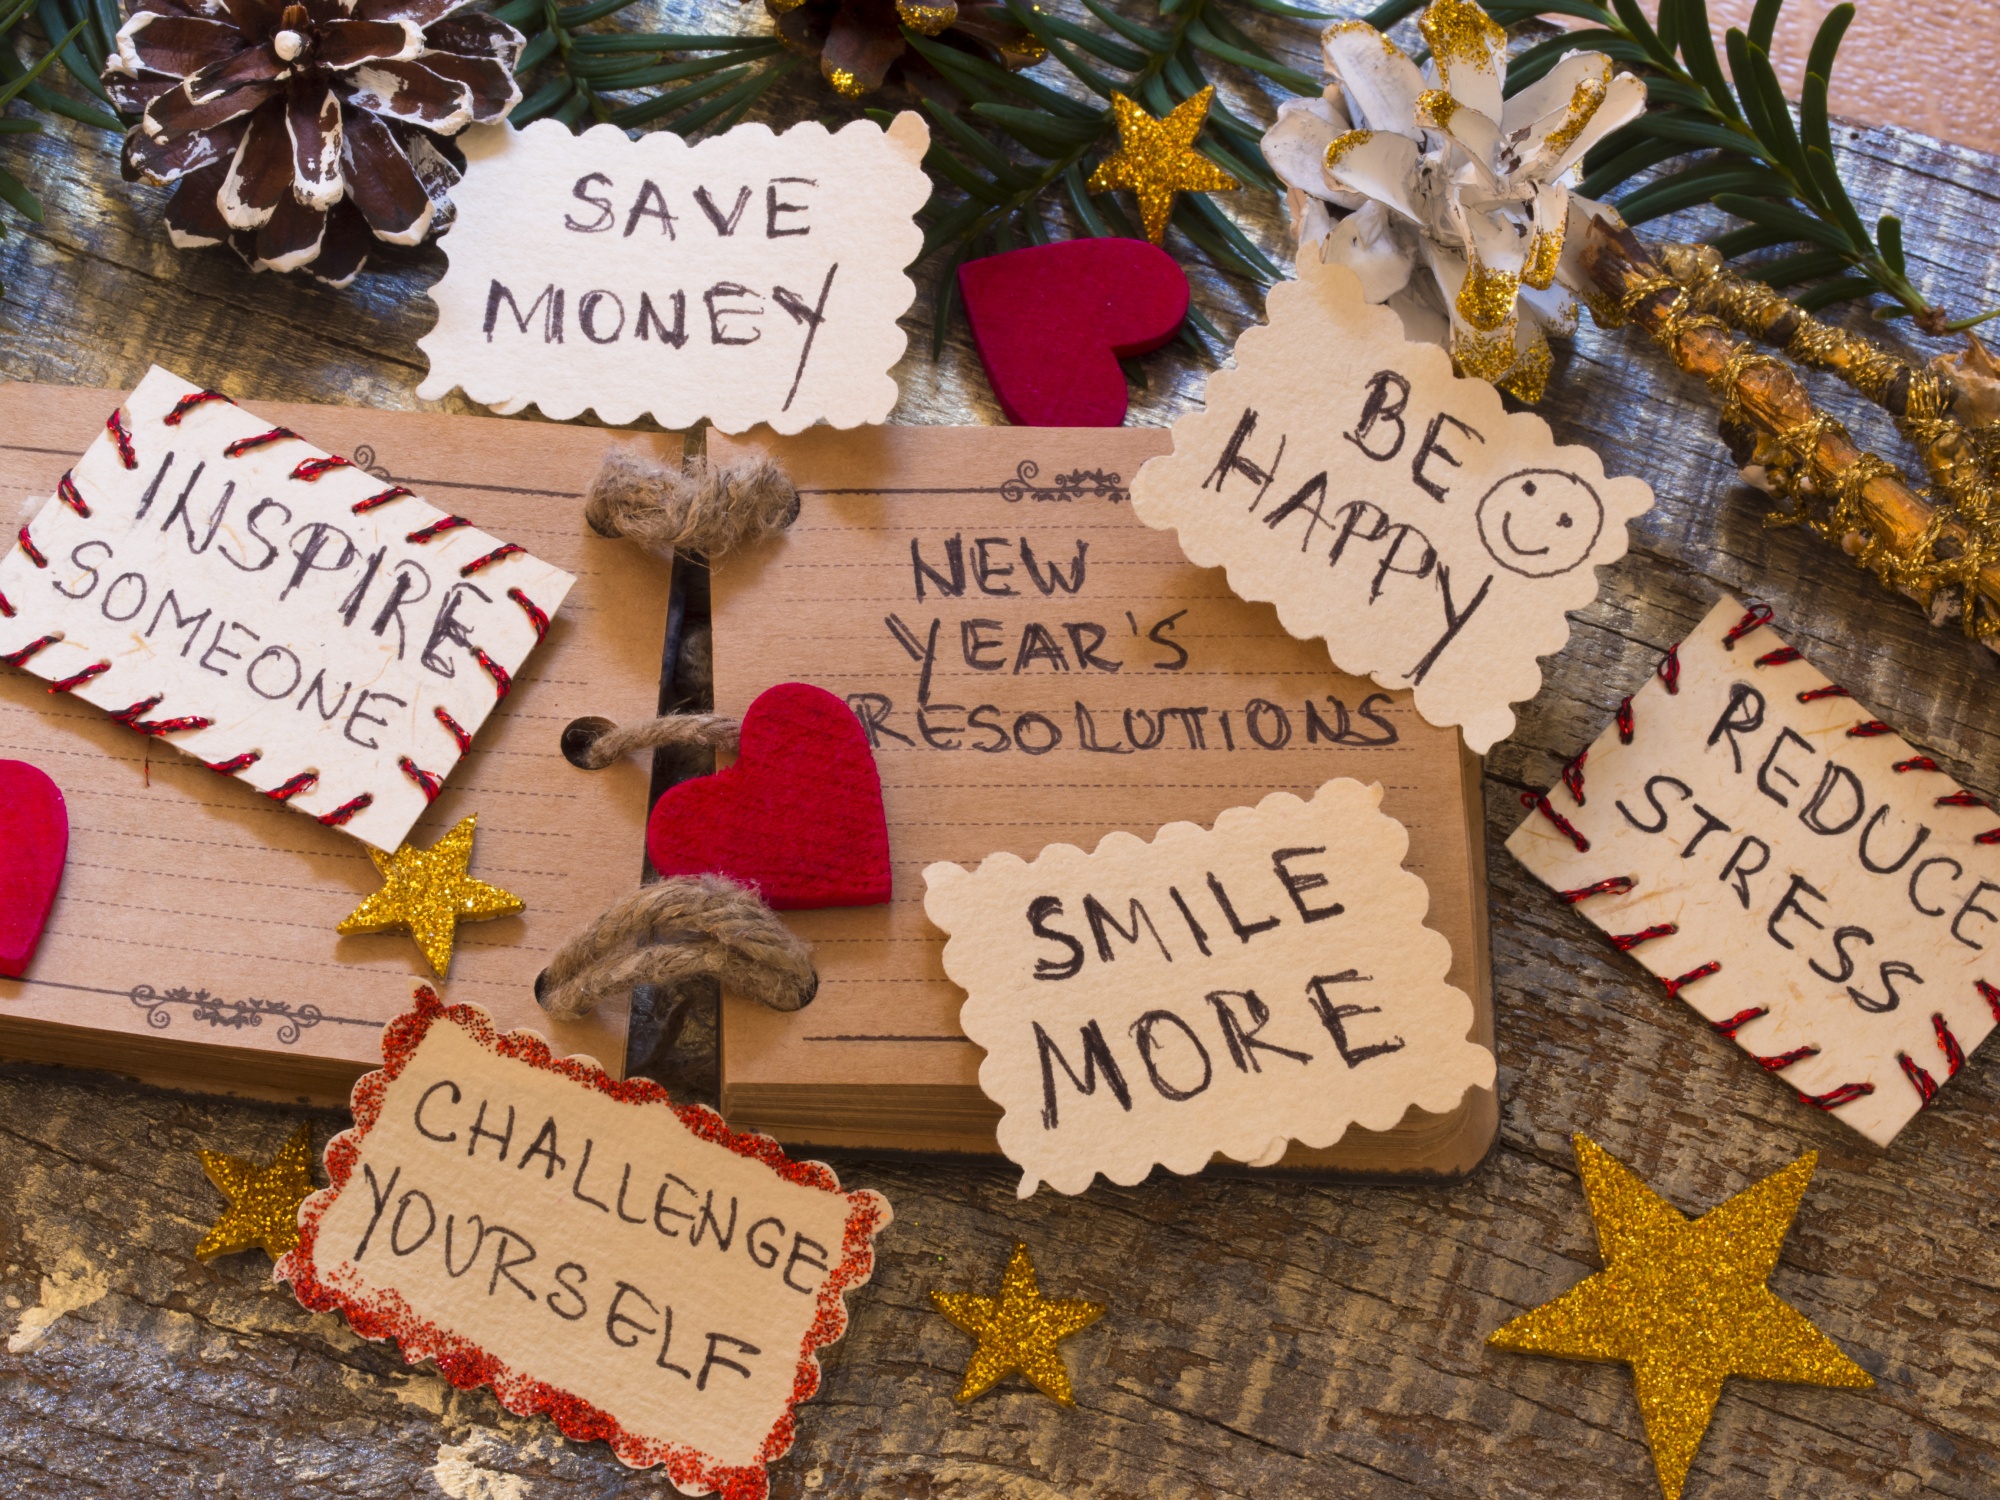 New Year's Resolutions, Rustic journal with New Year's Resolutions on tags surrounded by decroations